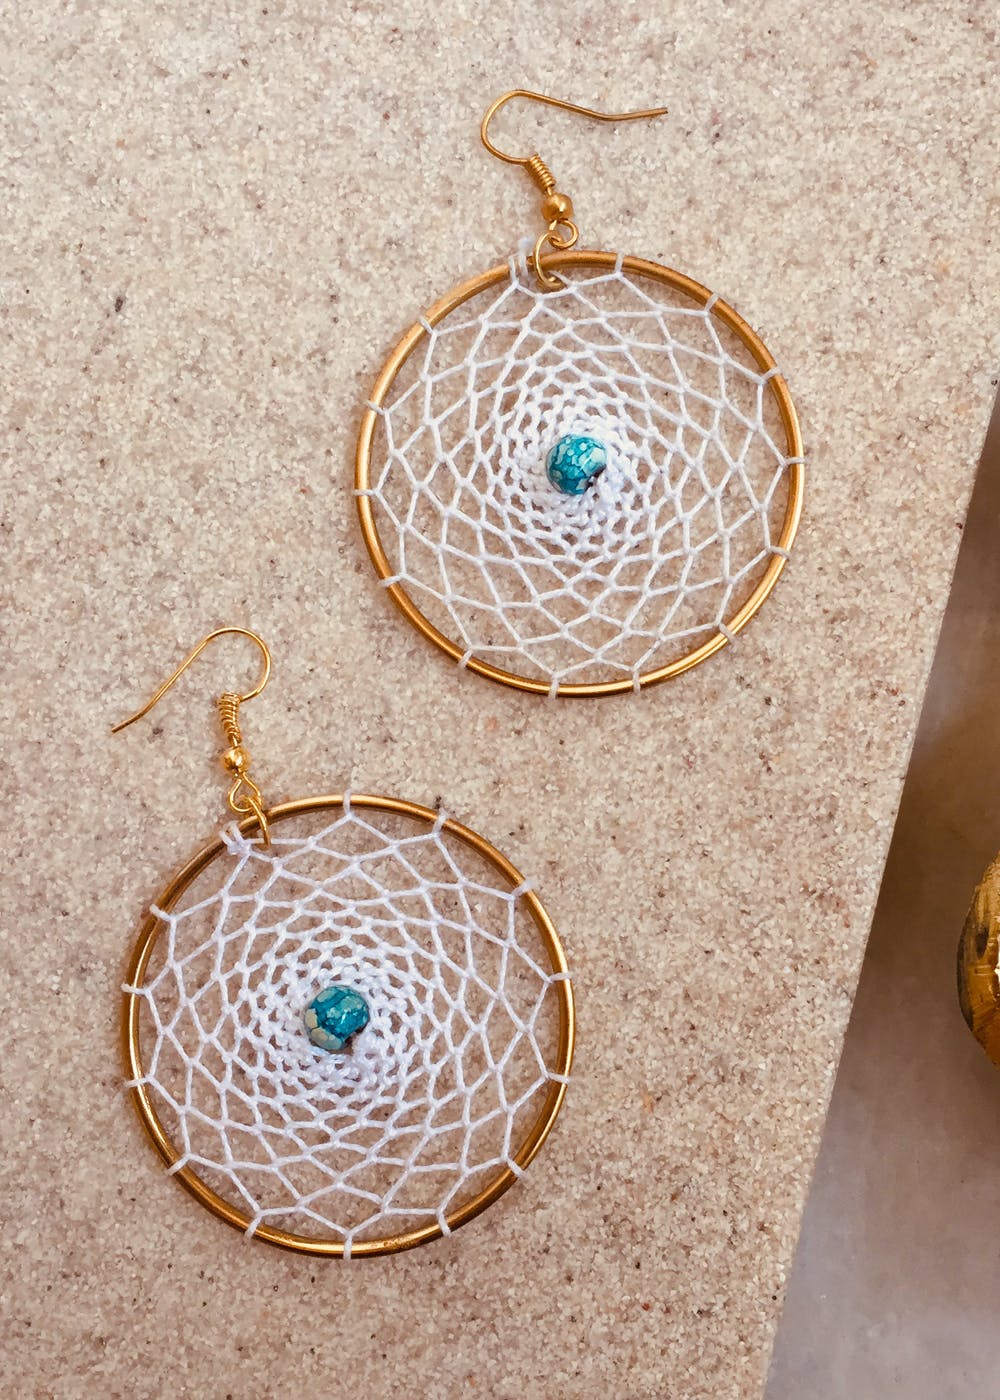 Turquoise Dreamcatcher Earrings With Leather Fringe | Sands Serendipity  Boutique